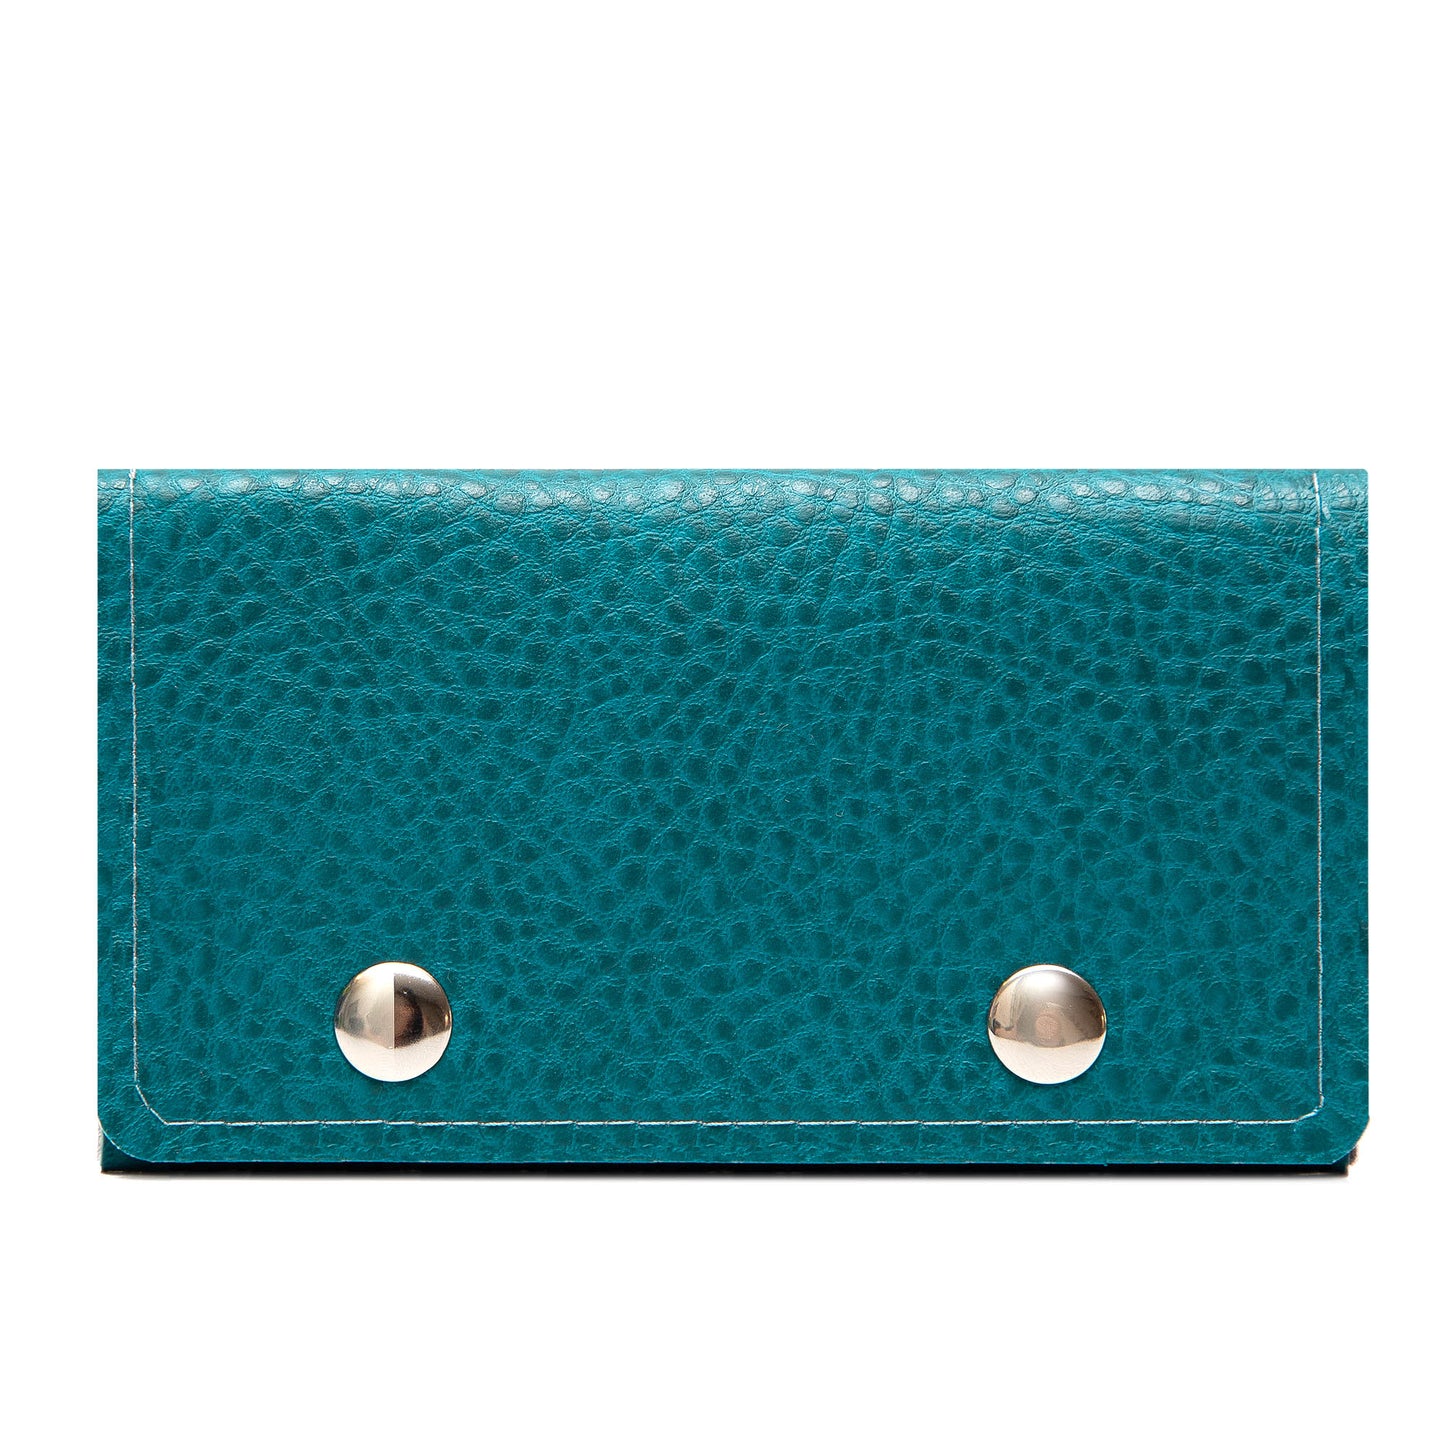 Handcrafted Biker Wallet with Detachable Chain - Cruelty-Free and Fashionably Functional - Teal Faux Leather